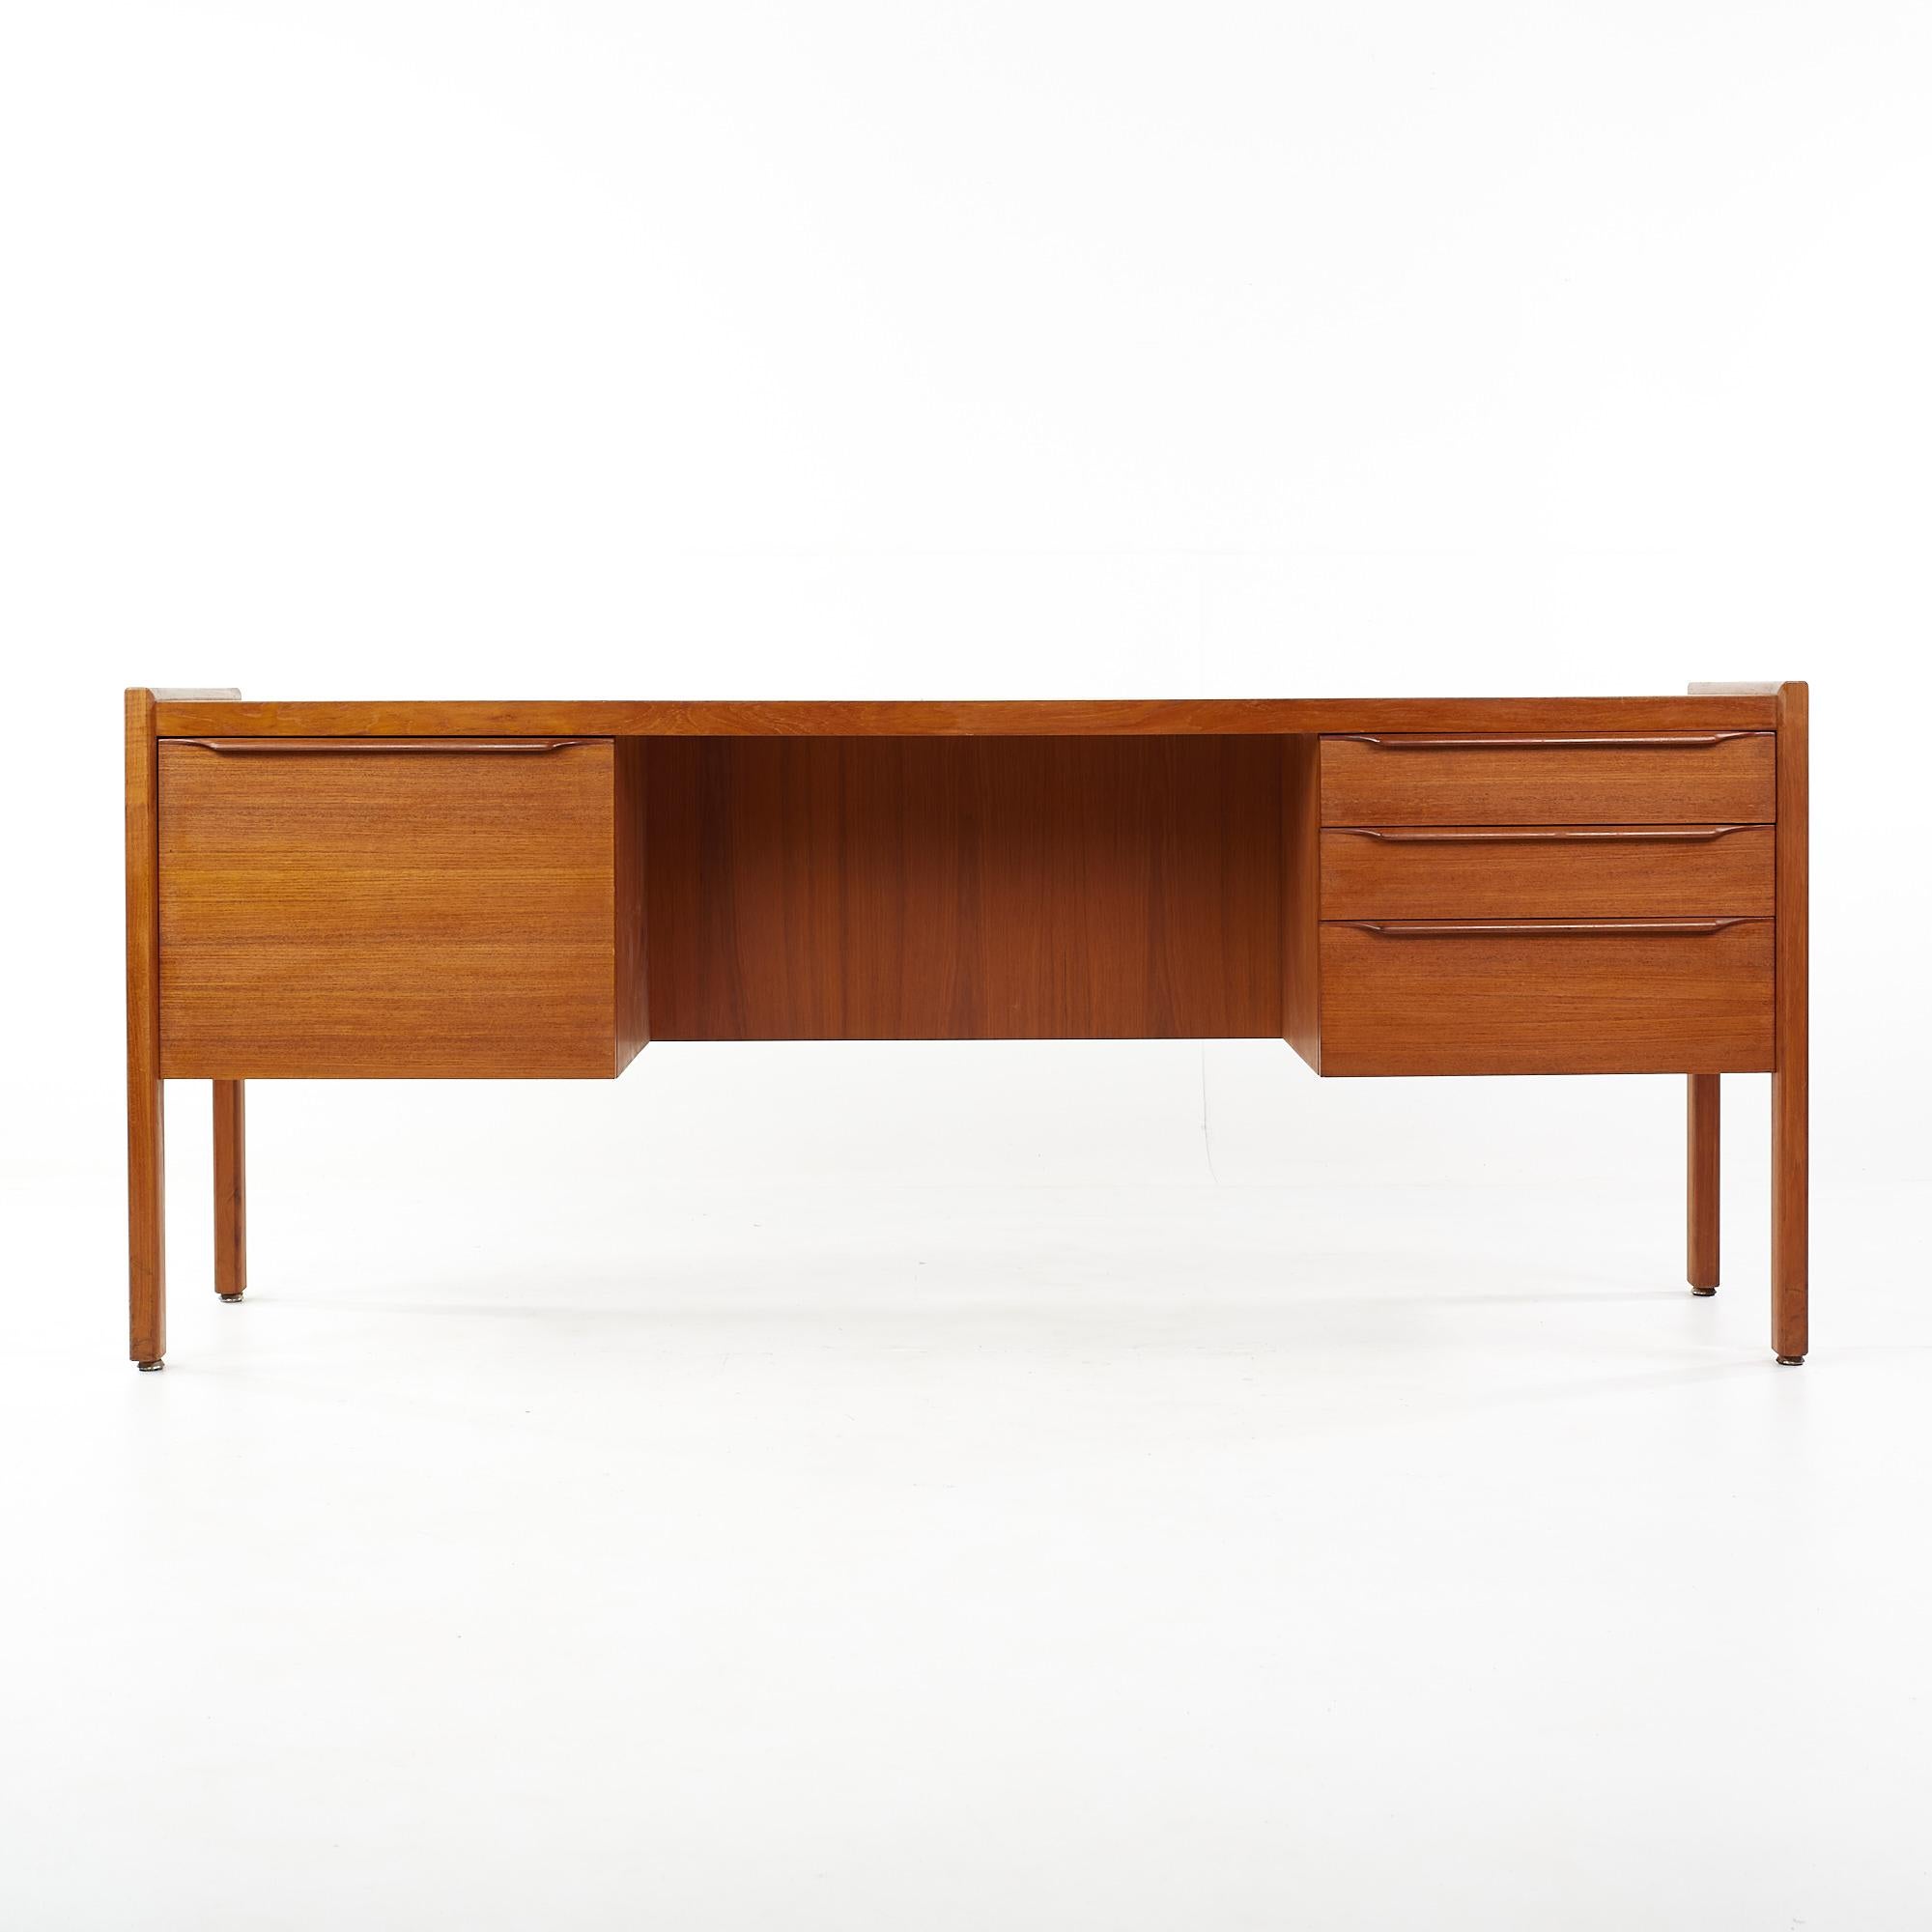 Arne Vodder Style mid century teak office credenza

This credenza measures: 72 wide x 21 deep x 29 inches high

All pieces of furniture can be had in what we call restored vintage condition. That means the piece is restored upon purchase so it’s